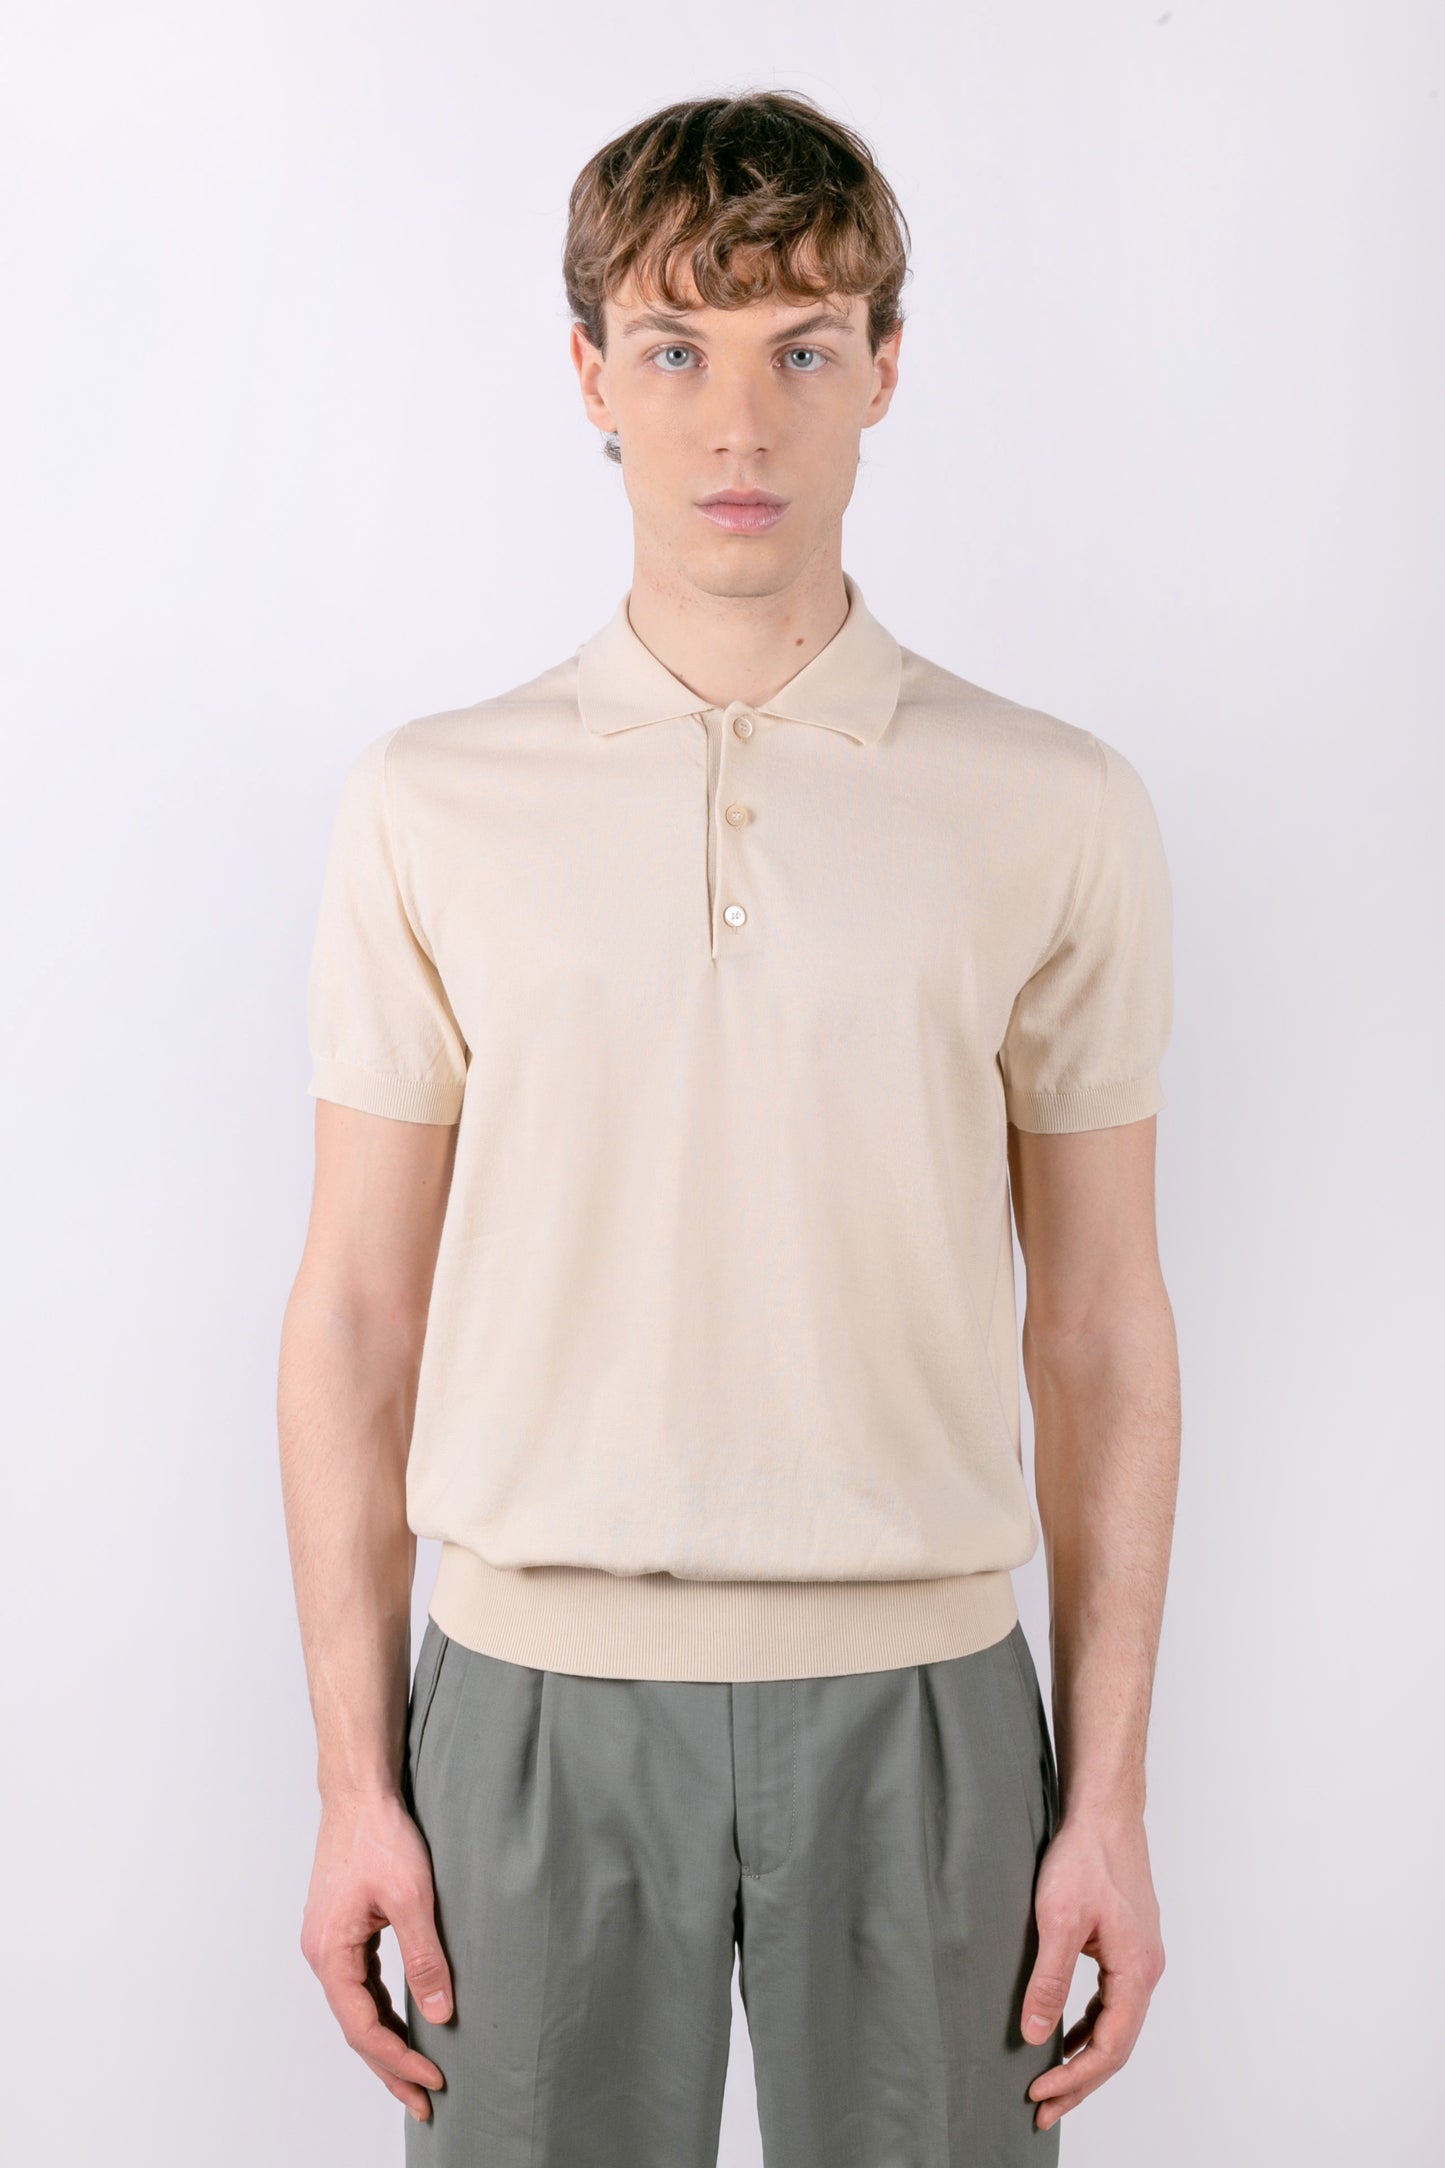 Short-sleeved polo shirt in natural color in cotton